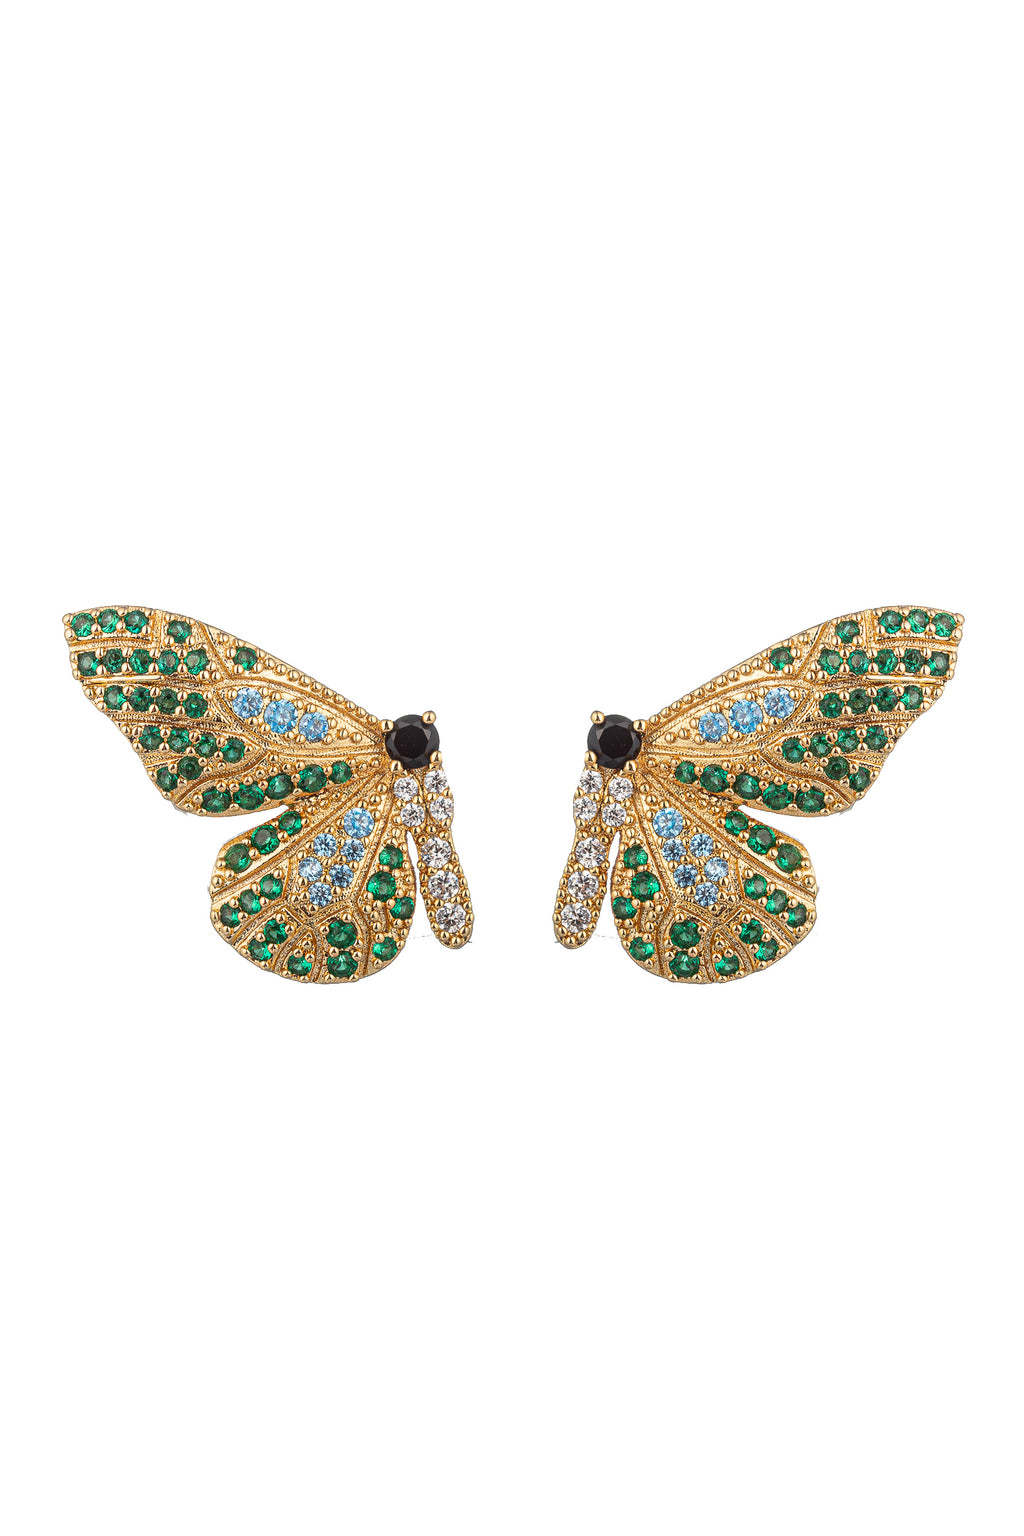 Gold tone brass butterfly wing earrings studded with multicolored CZ & glass crystals.